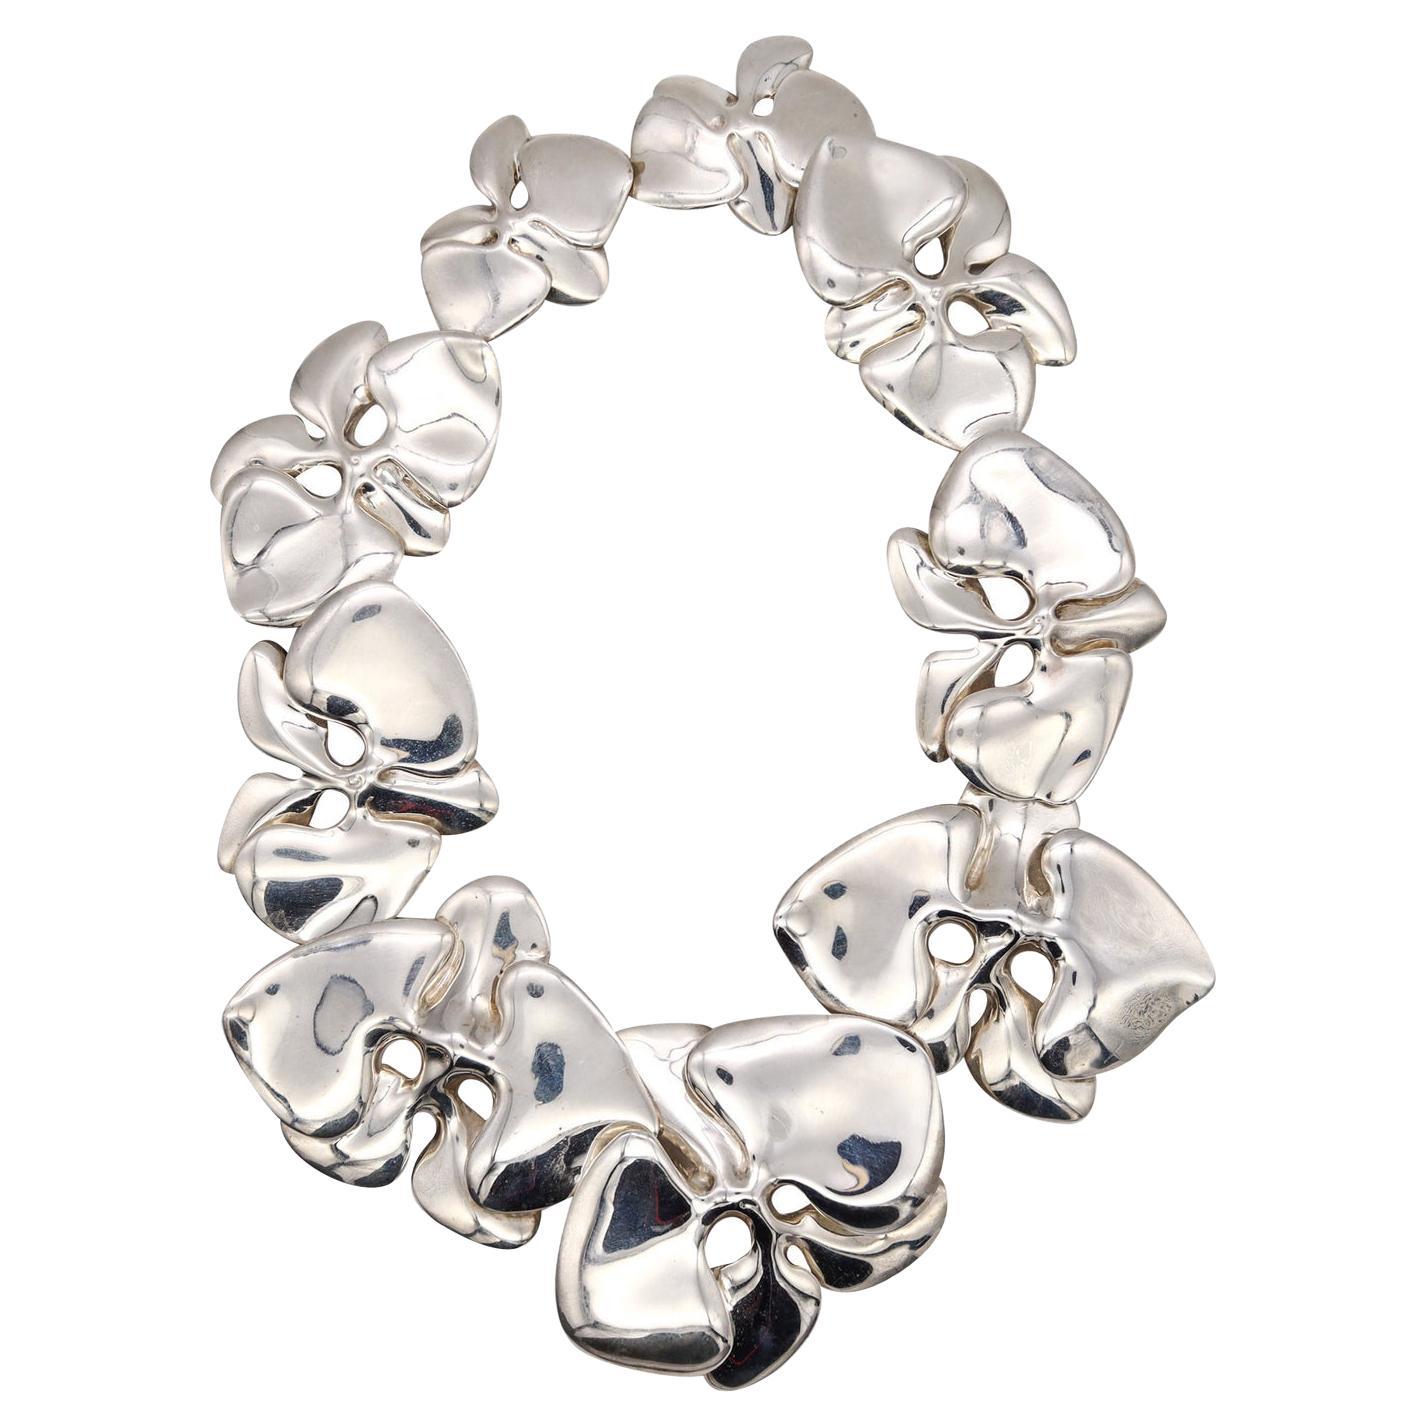 Angela Cummings 1984 Rare Sculptural Orchids Necklace in 925 Sterling Silver For Sale